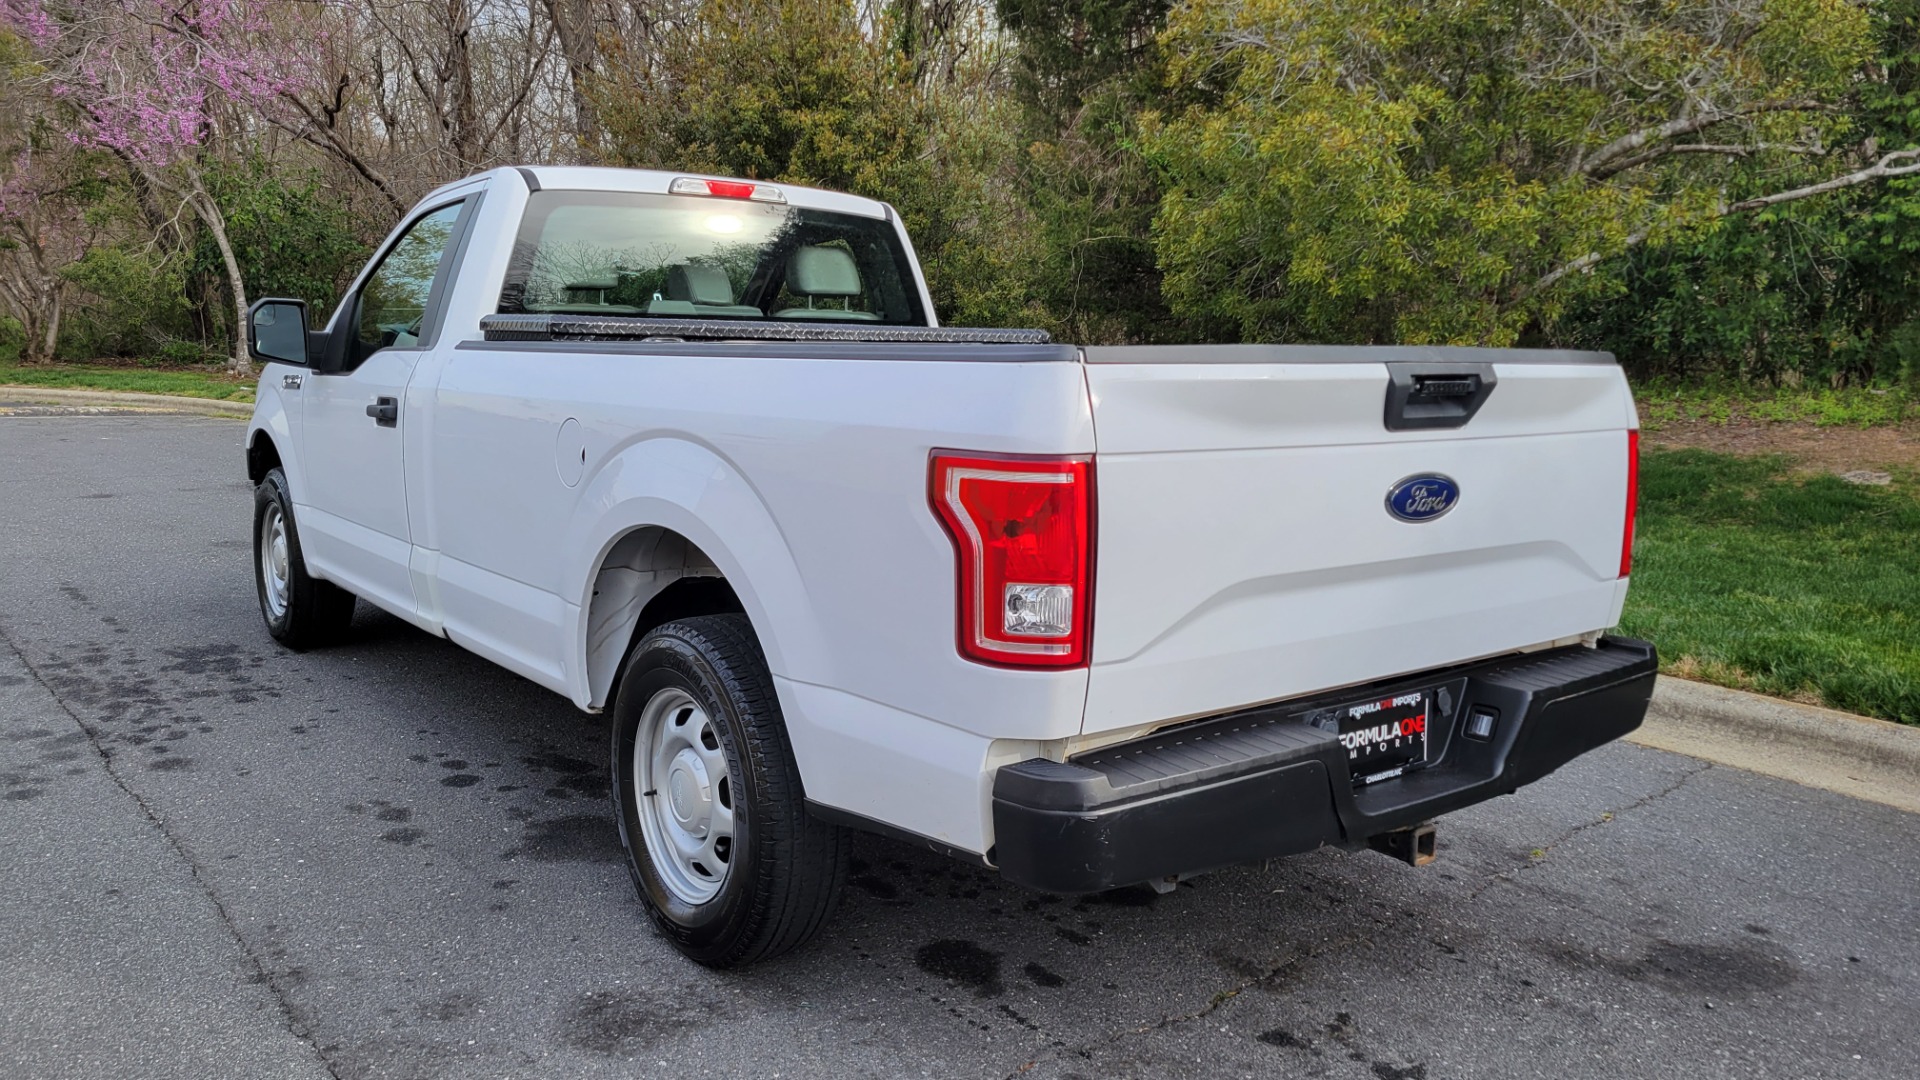 Used 2016 Ford F-150 XL REGULAR CAB 4X2 / 3.5L V6 / 6-SPD AUTO / TOWING / TOOL BOX for sale Sold at Formula Imports in Charlotte NC 28227 3